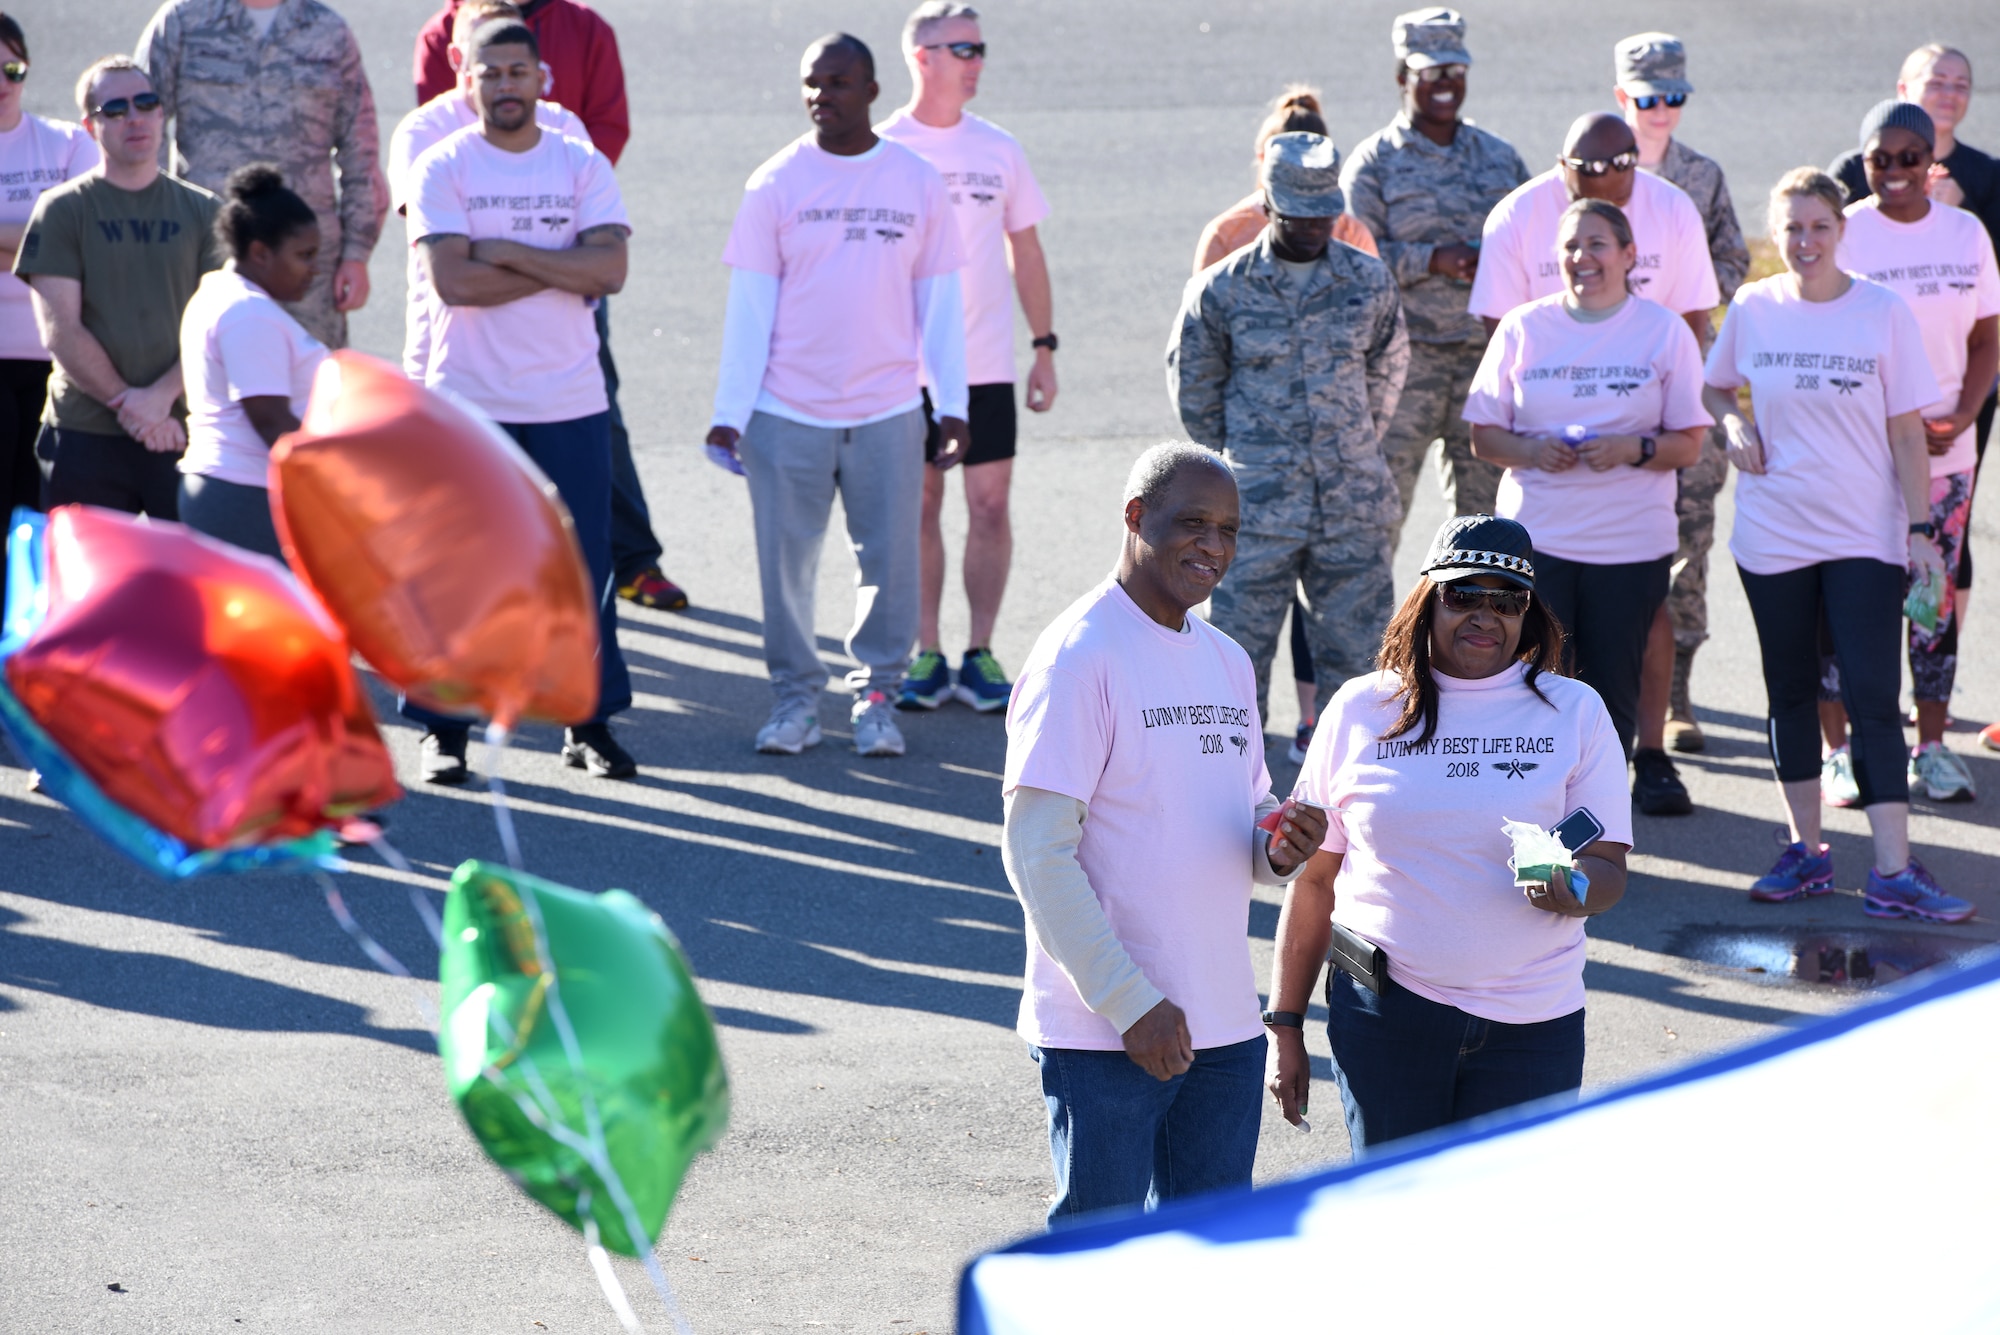 Members of the North Carolina Air National Guard come together during a 1-mile walk/run to support family and friends of recently deceased U.S. Air Force Recruiter Master Sgt. Valanda Pettis. Master Sgt. Pettis’ battle with cancer came to an end this Fall and to honor her memory, the NCANG Recruiting office hosted the Color Run, which involves a 1-mile walk/run with colorful chalk thrown in the air and on participants, to inspire cheer in those she left behind. The theme of the race, “Livin’ my best life,” is a phrase Pettis was often heard singing or using around her loved ones to instill faith, joy, and love.